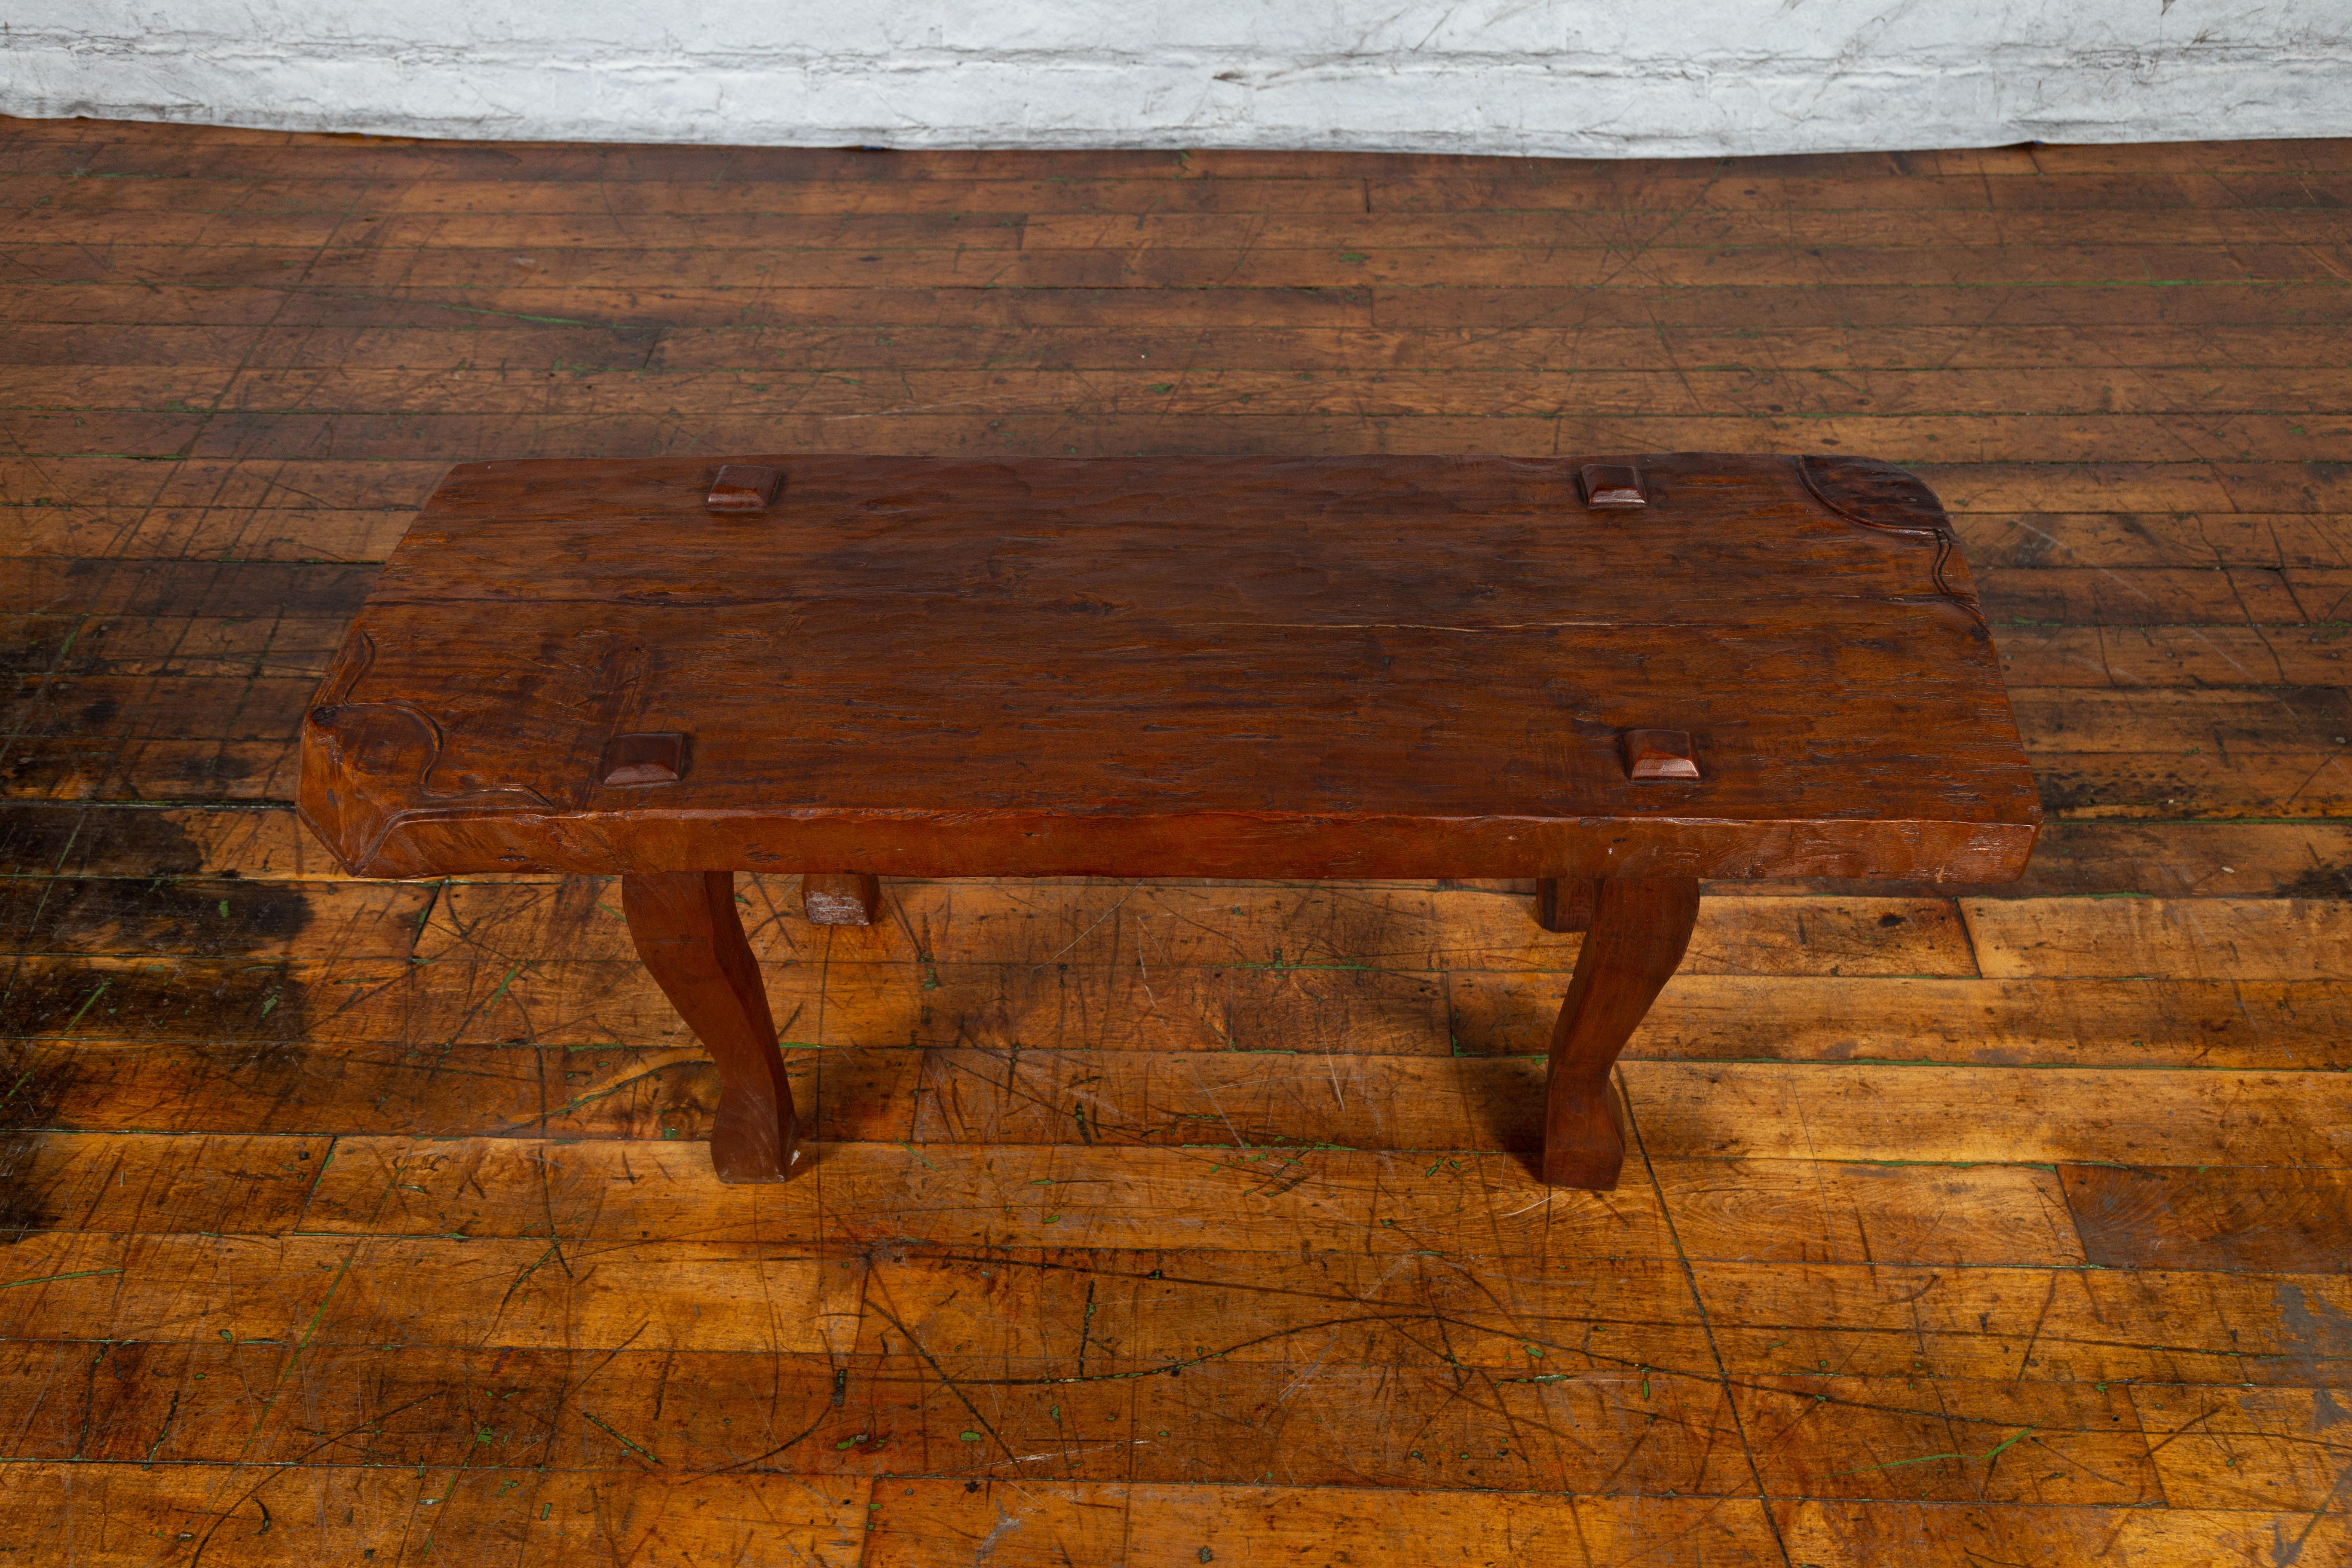 Javanese Arts & Crafts Teak Table with Recessed Legs and Distressed Appearance 3